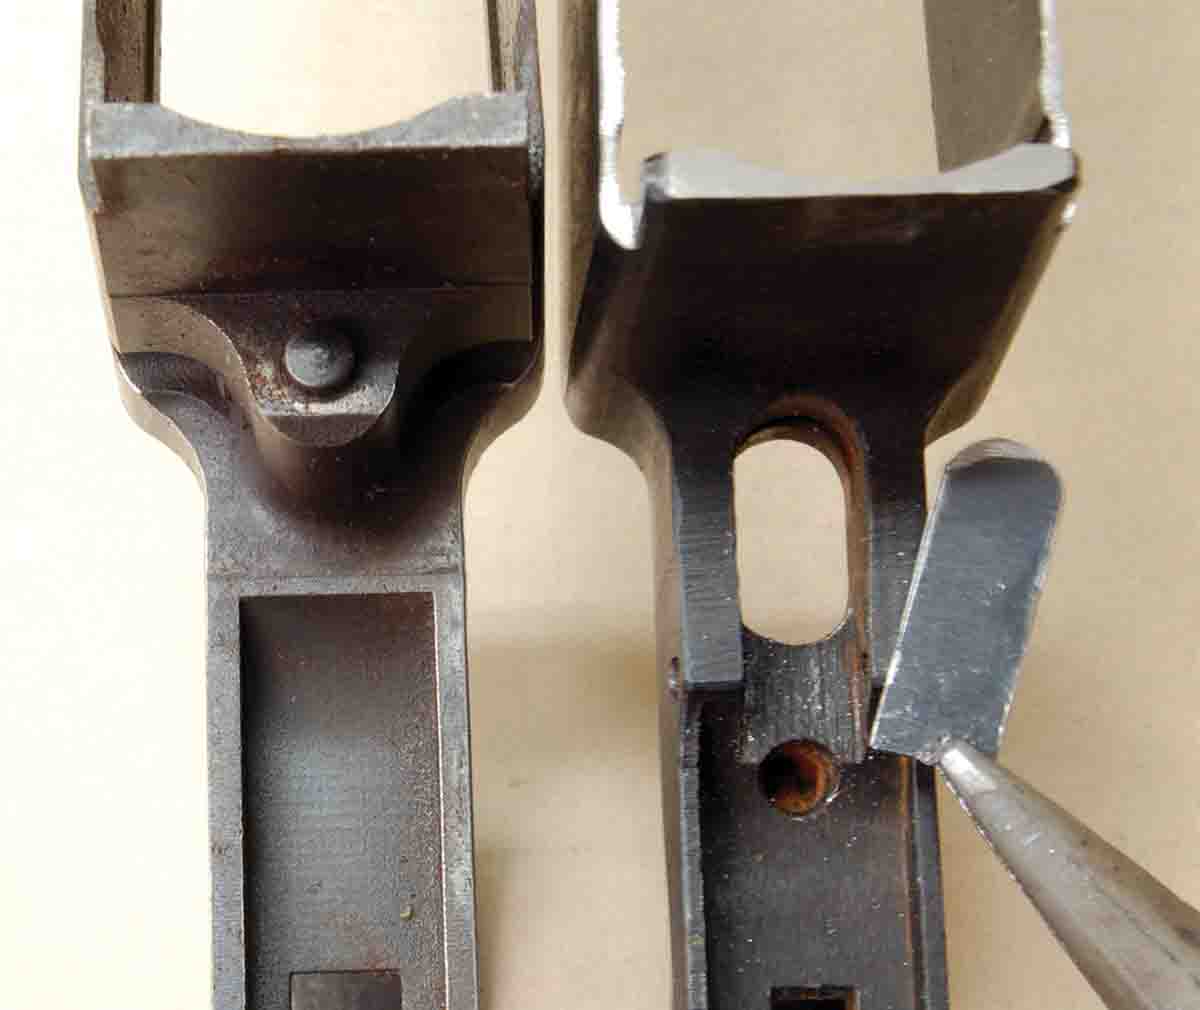 Installing a rear attaching screw is easiest on a Mauser (left). The Springfield (right) requires covering a large latch hole.